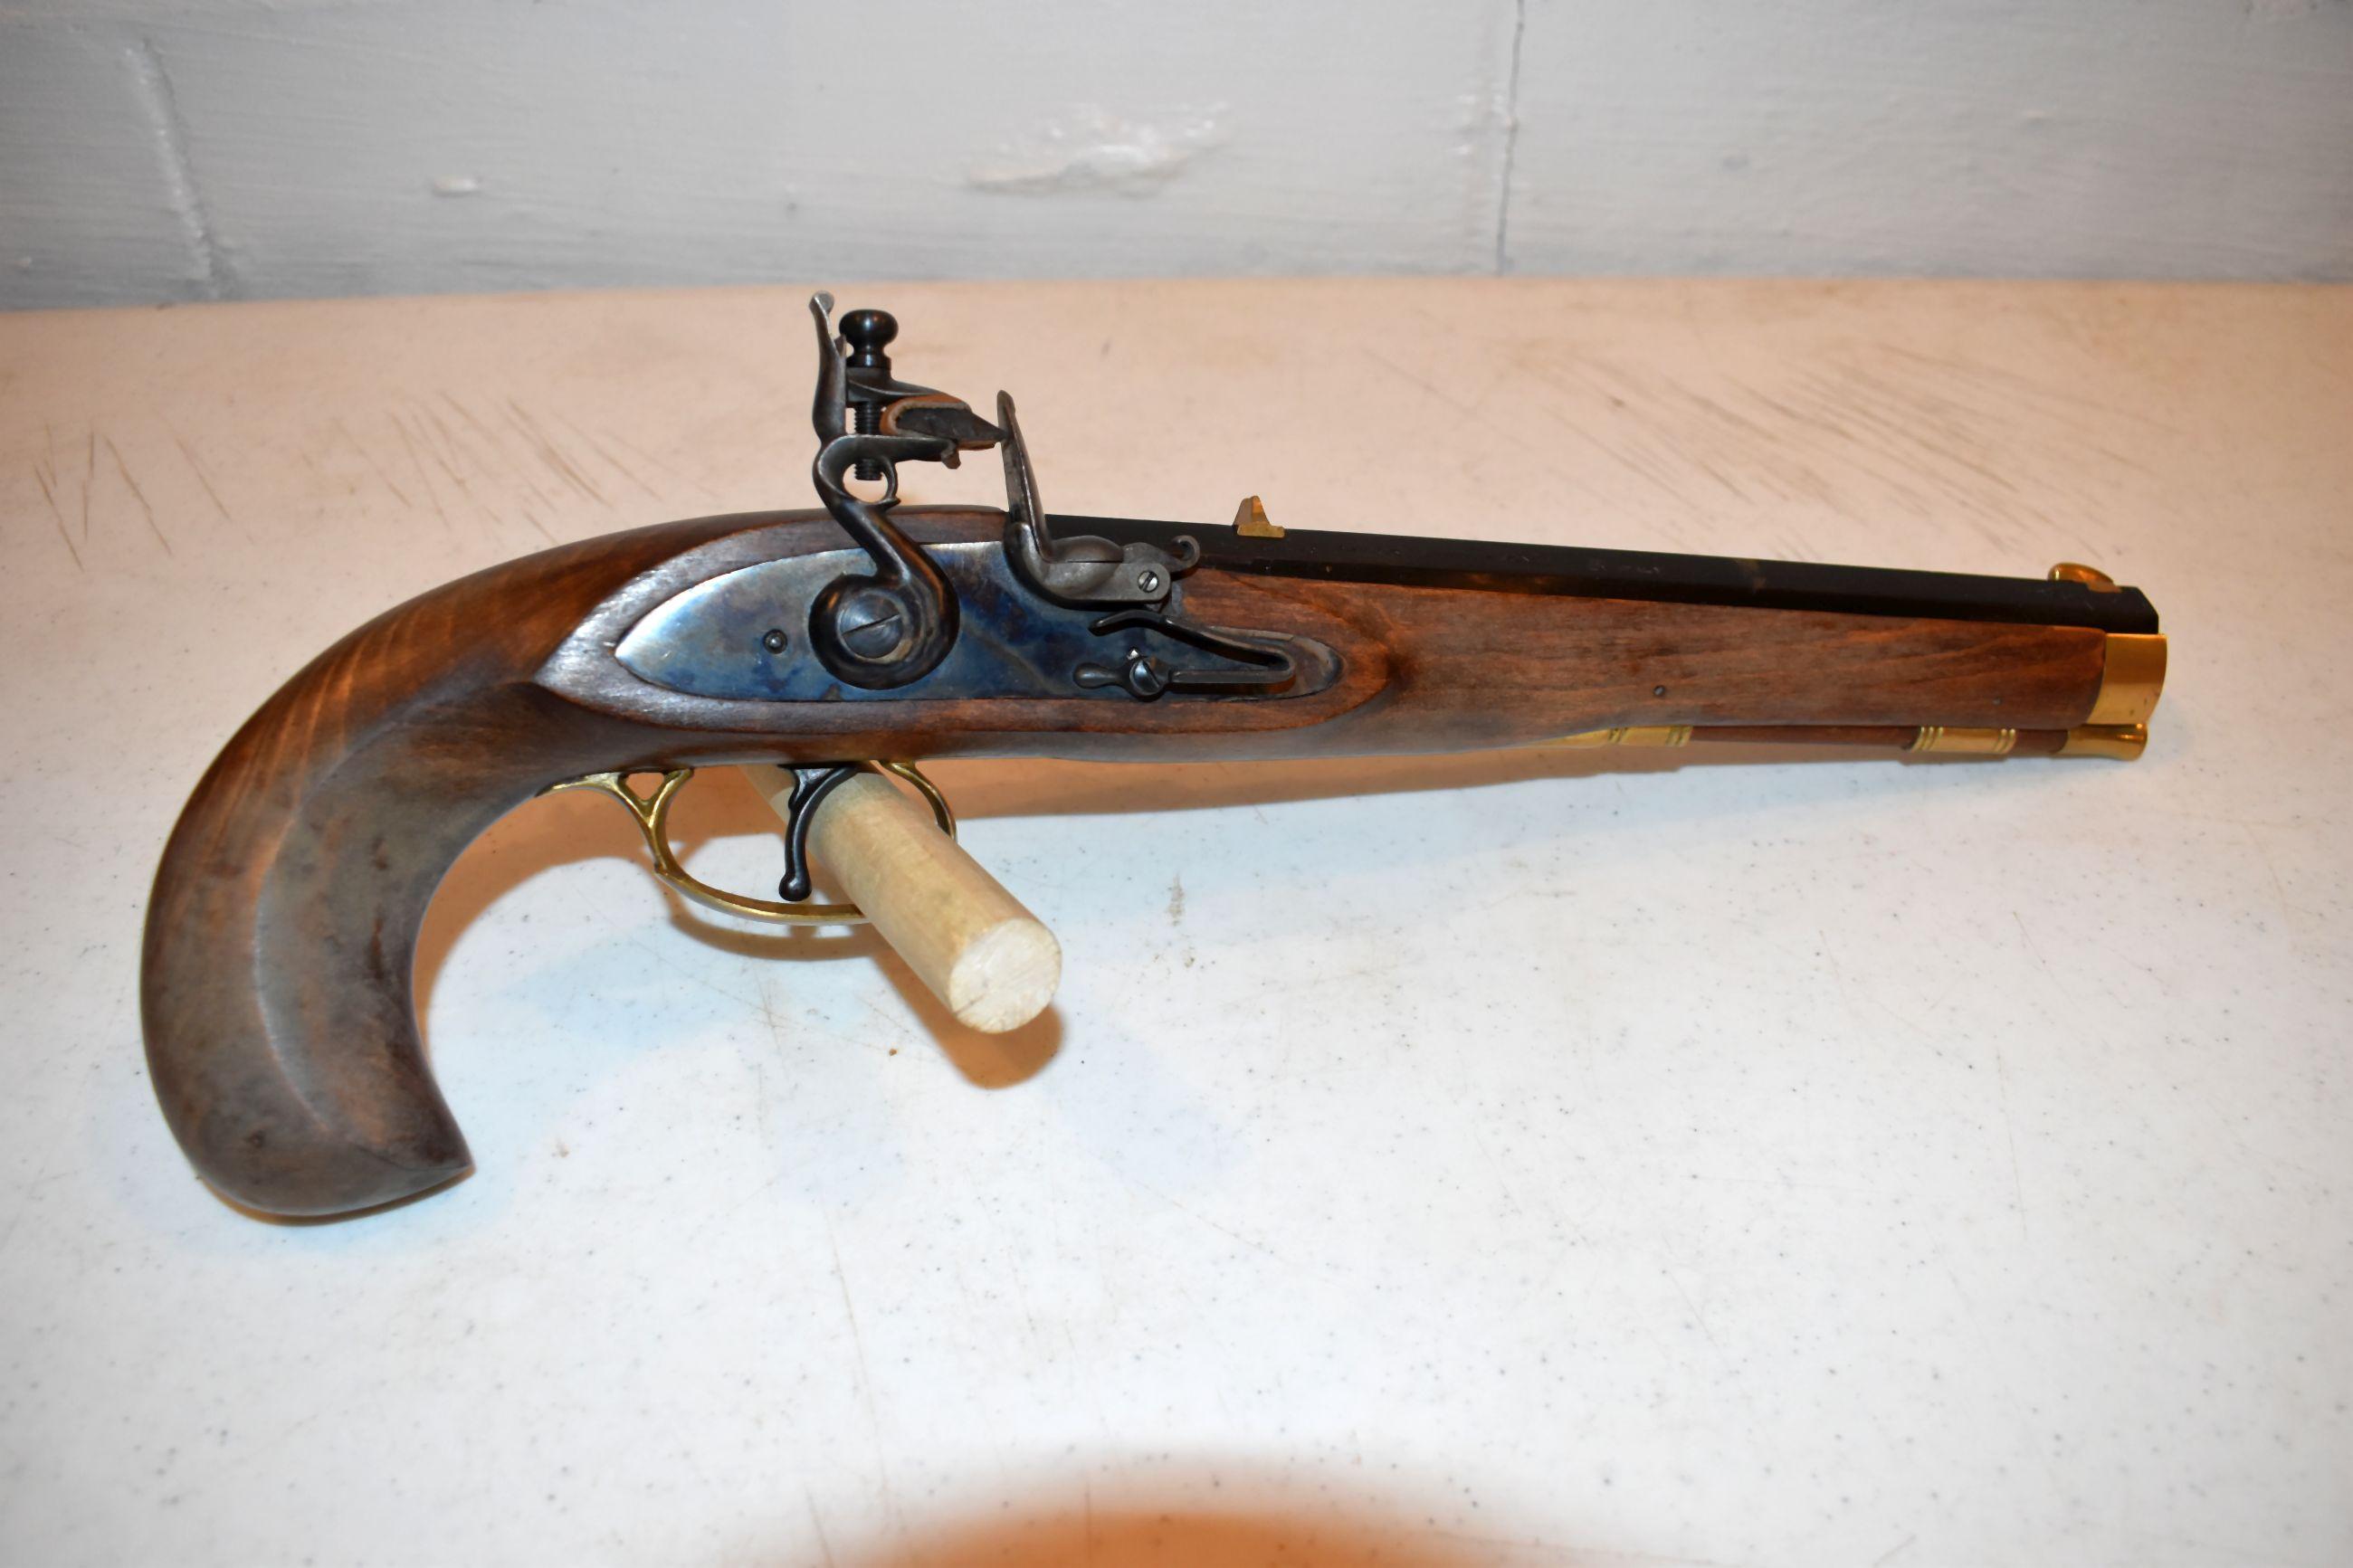 Italian Black Powder Pistol, Model 1810 .45 Caliber, With Cleaning Rods